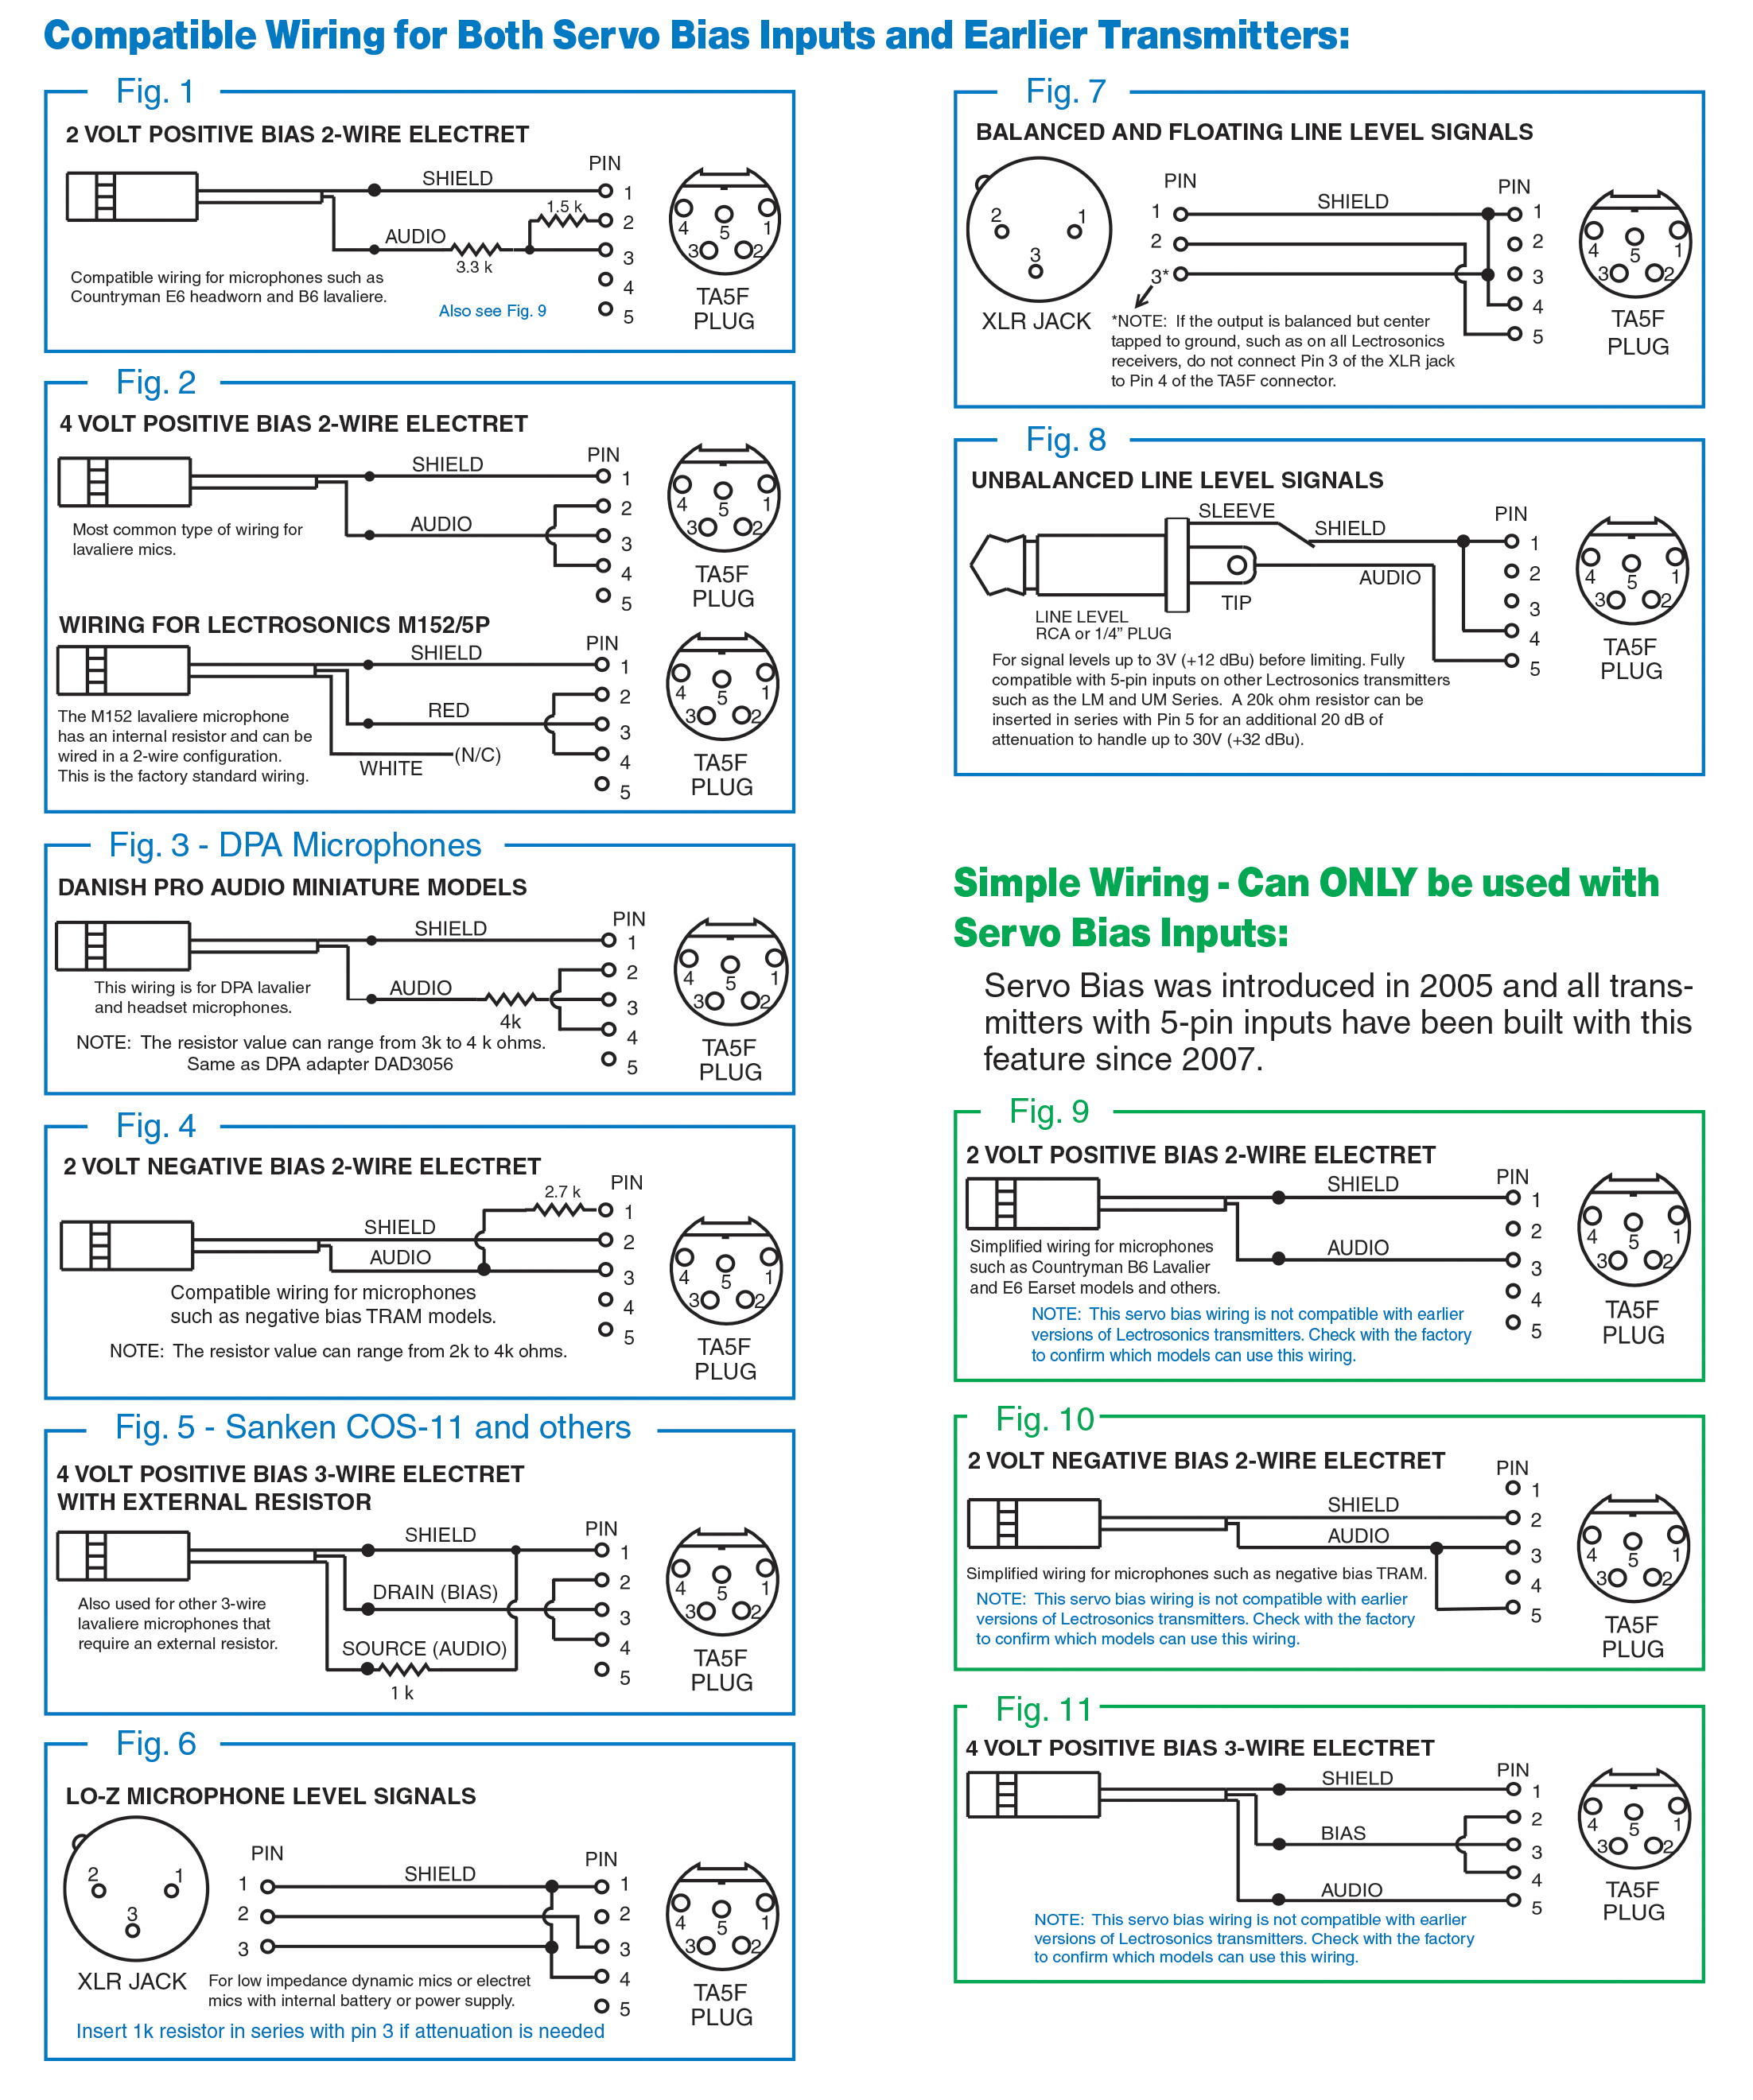 click here to view download fullsize jpg of wiring diagrams above